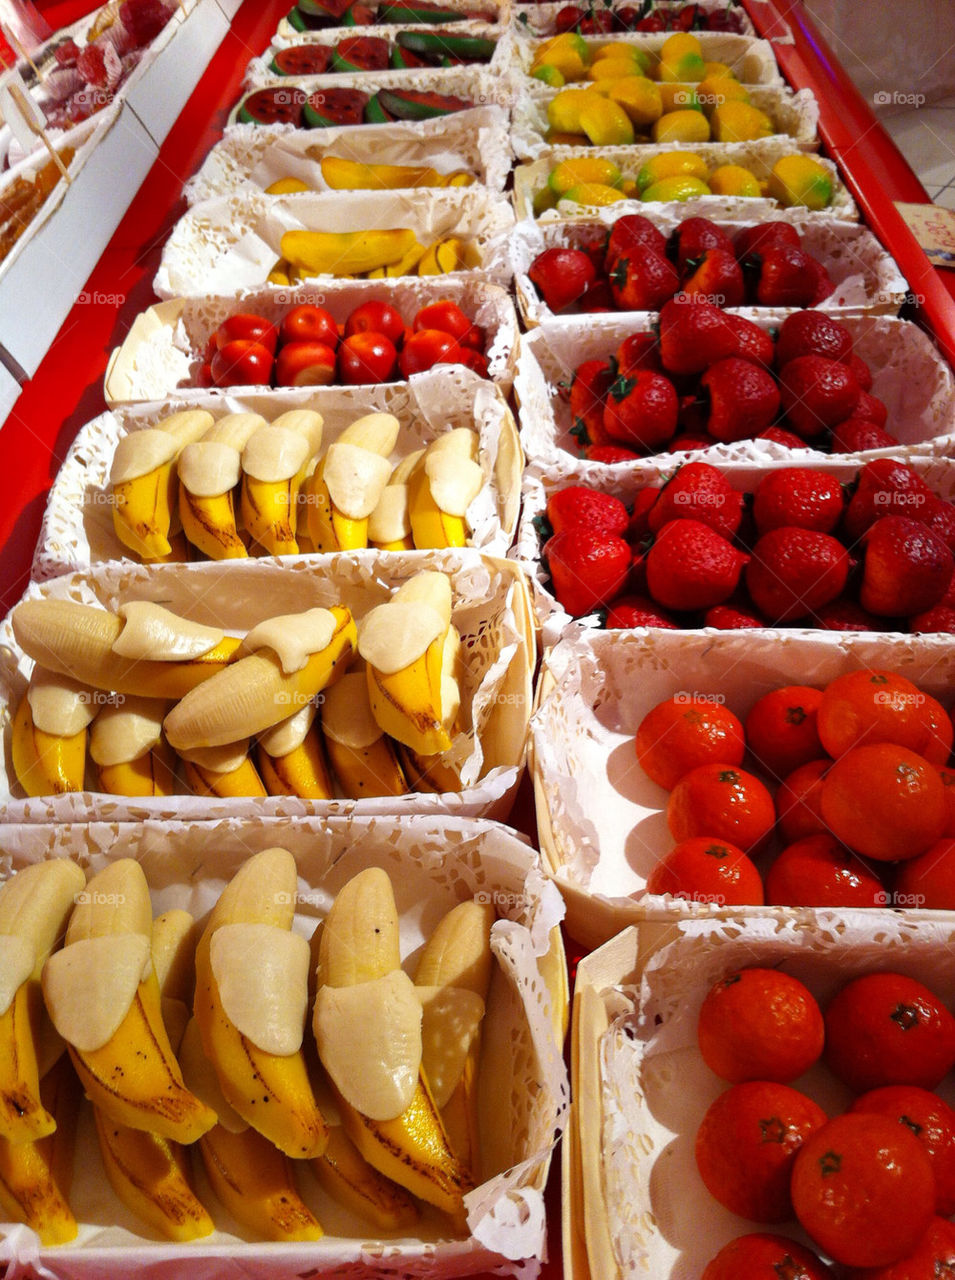 france marzipan market fruits by benzo